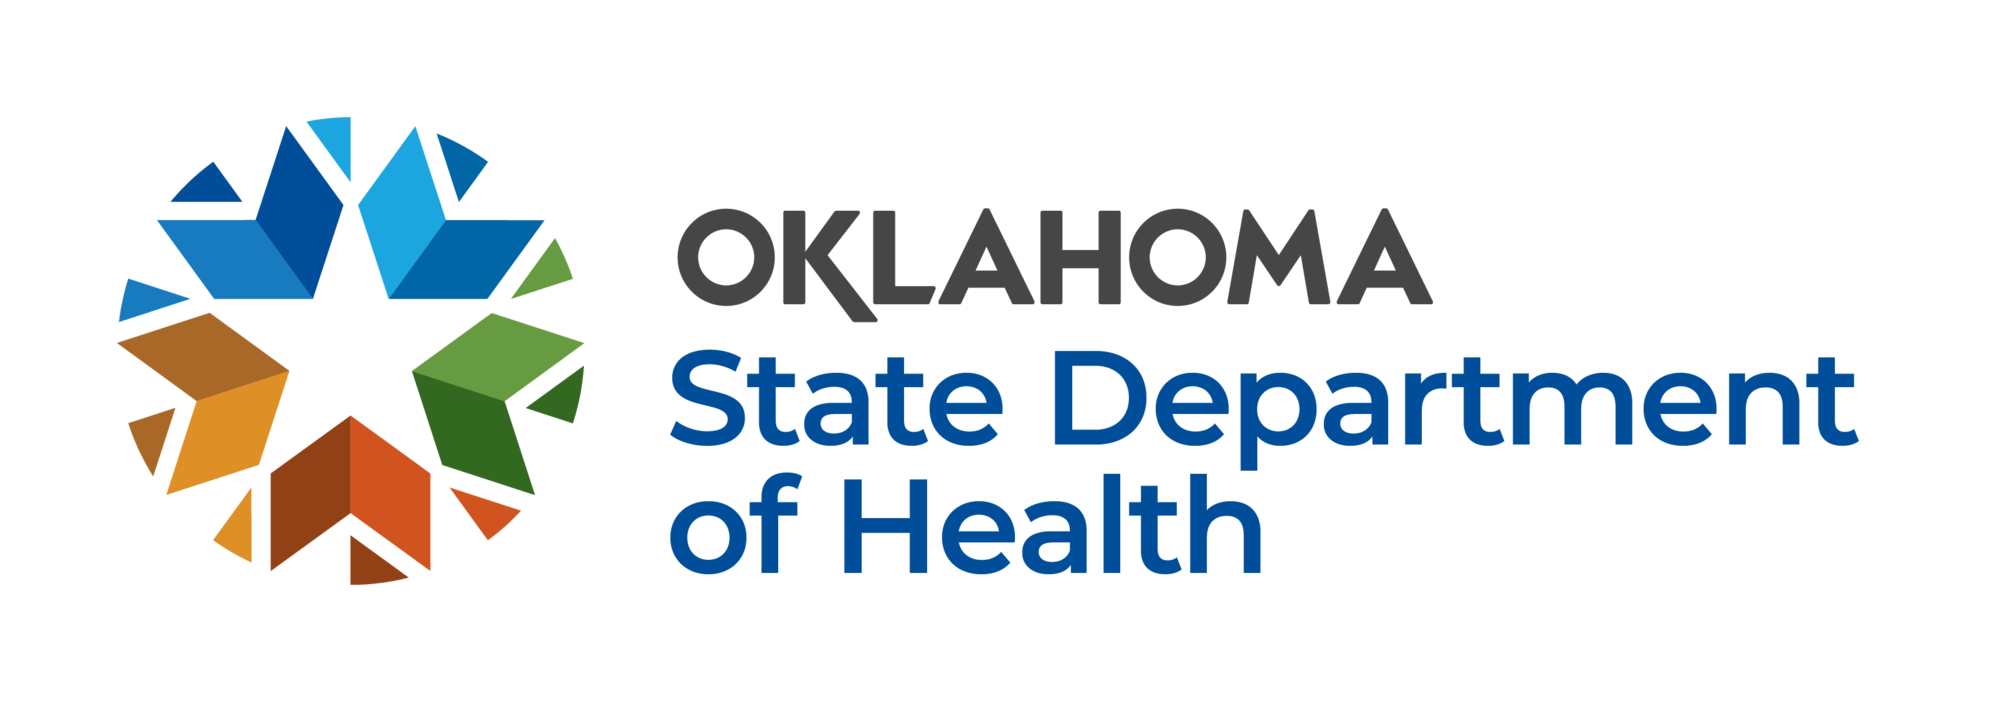 Oklahoma State Department of Health (340)